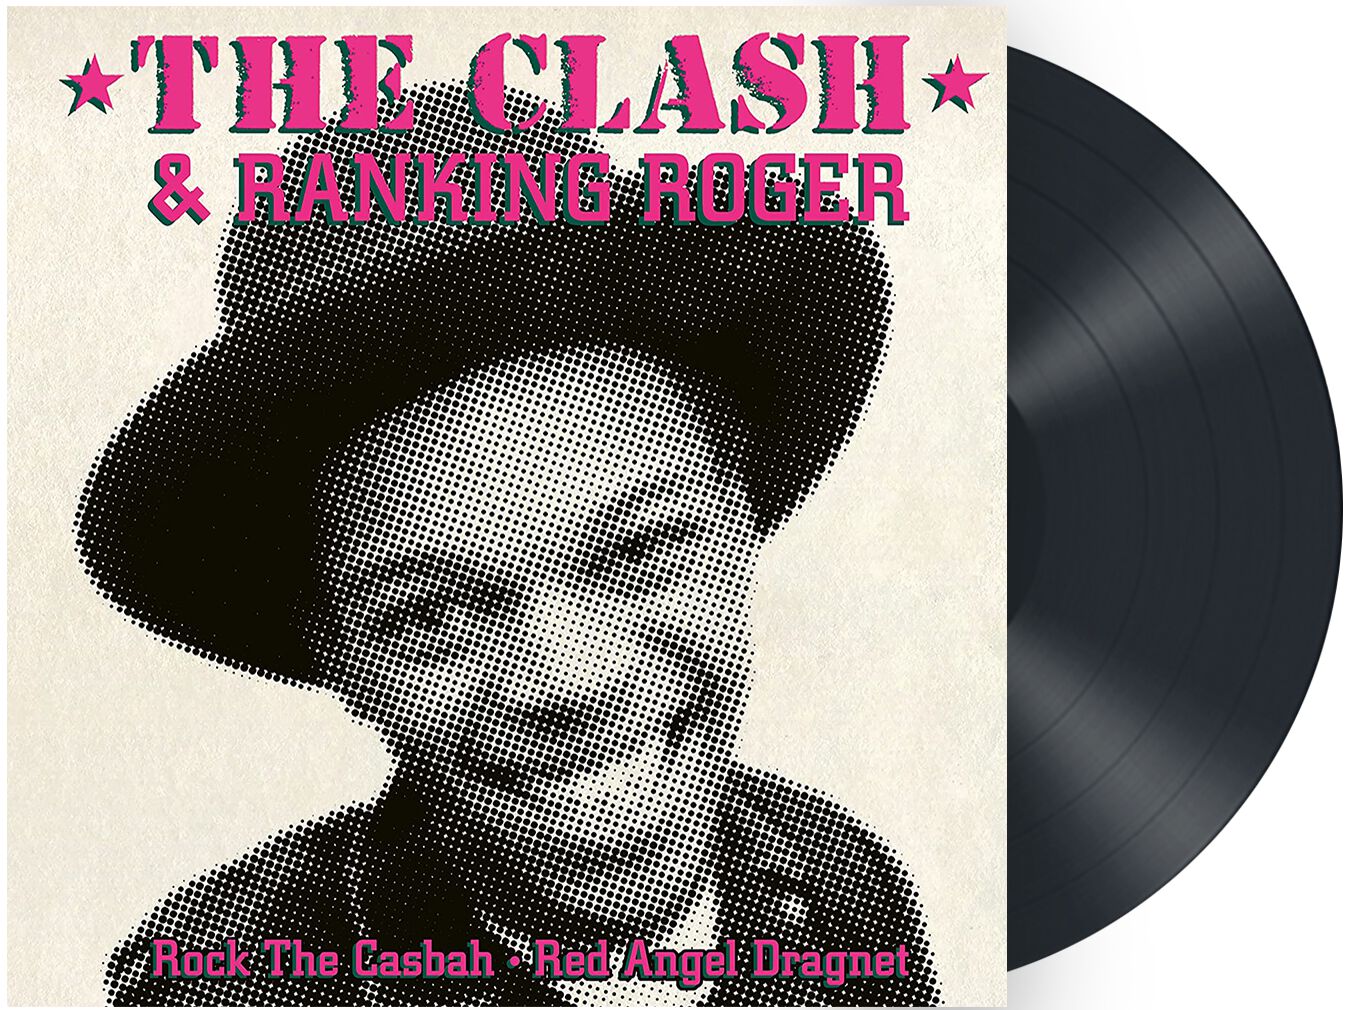 The Clash & Ranking Roger - Rock the Casbah SINGLE multicolor